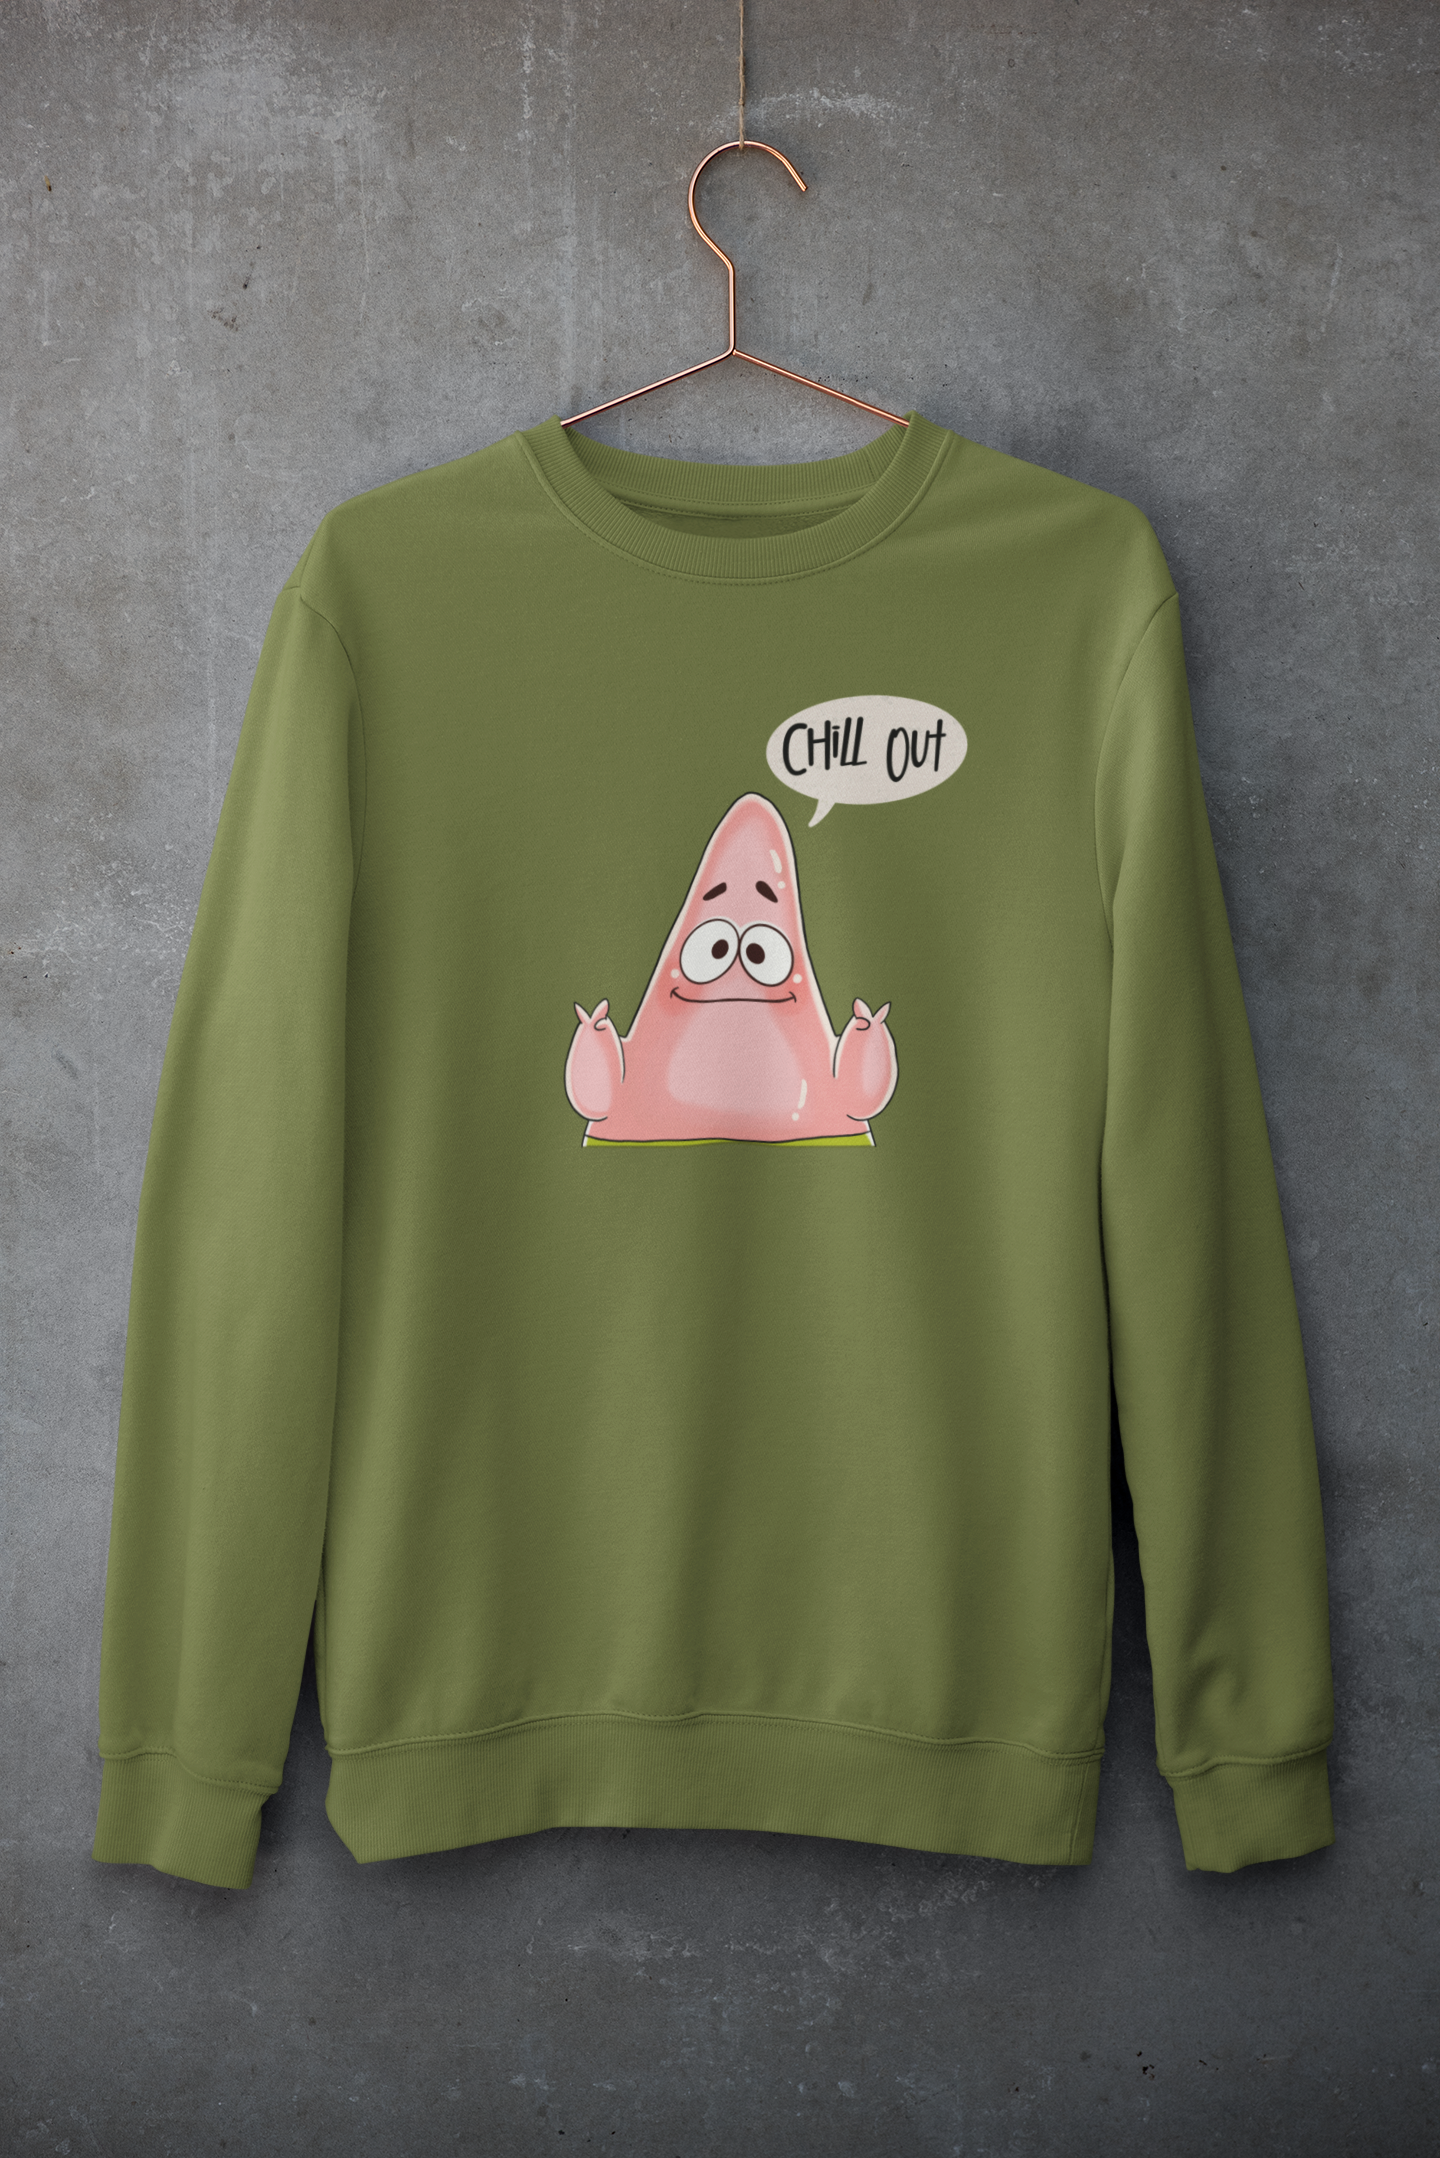 Chill Out - Winter Sweatshirts OLIVE GREEN